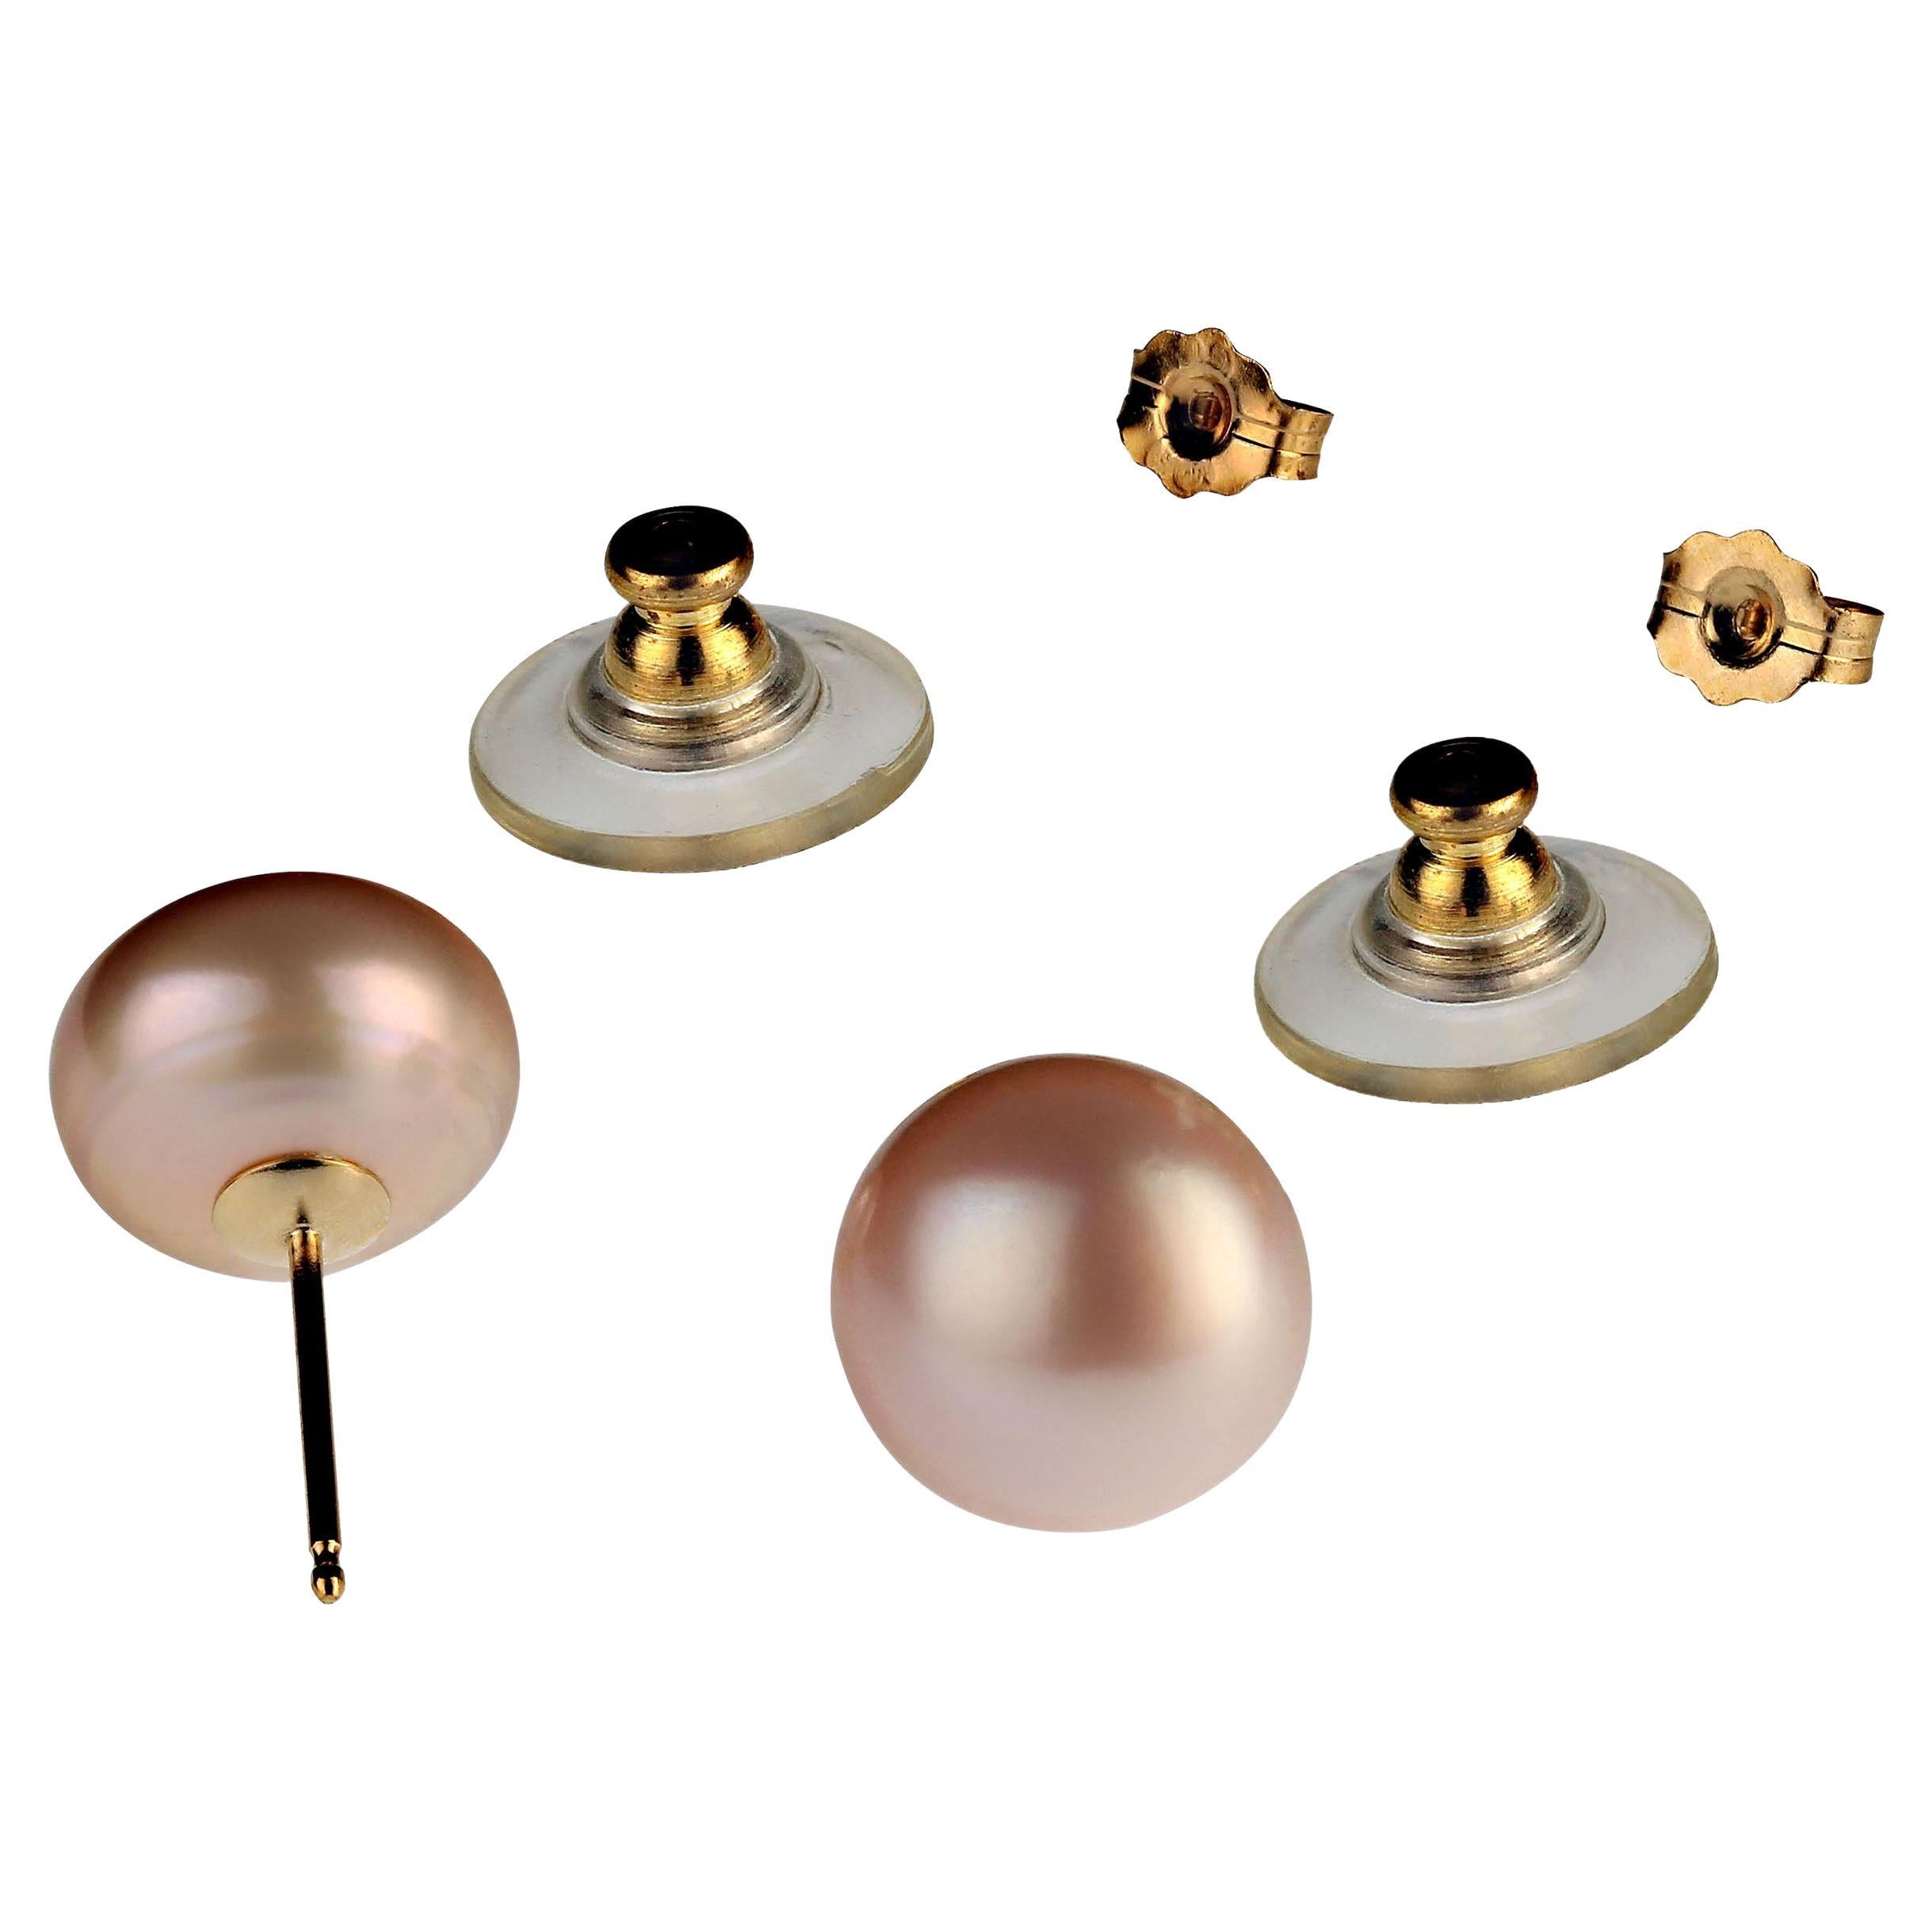 Your classic jewelry must have, lustrous, glowing 10.5MM Pearl Studs. These gorgeous studs are glowing pinky with 14k yellow gold posts and butterfly backs, and cushion backs.  The cushion backs ensure comfort and keep the pearl secured properly on